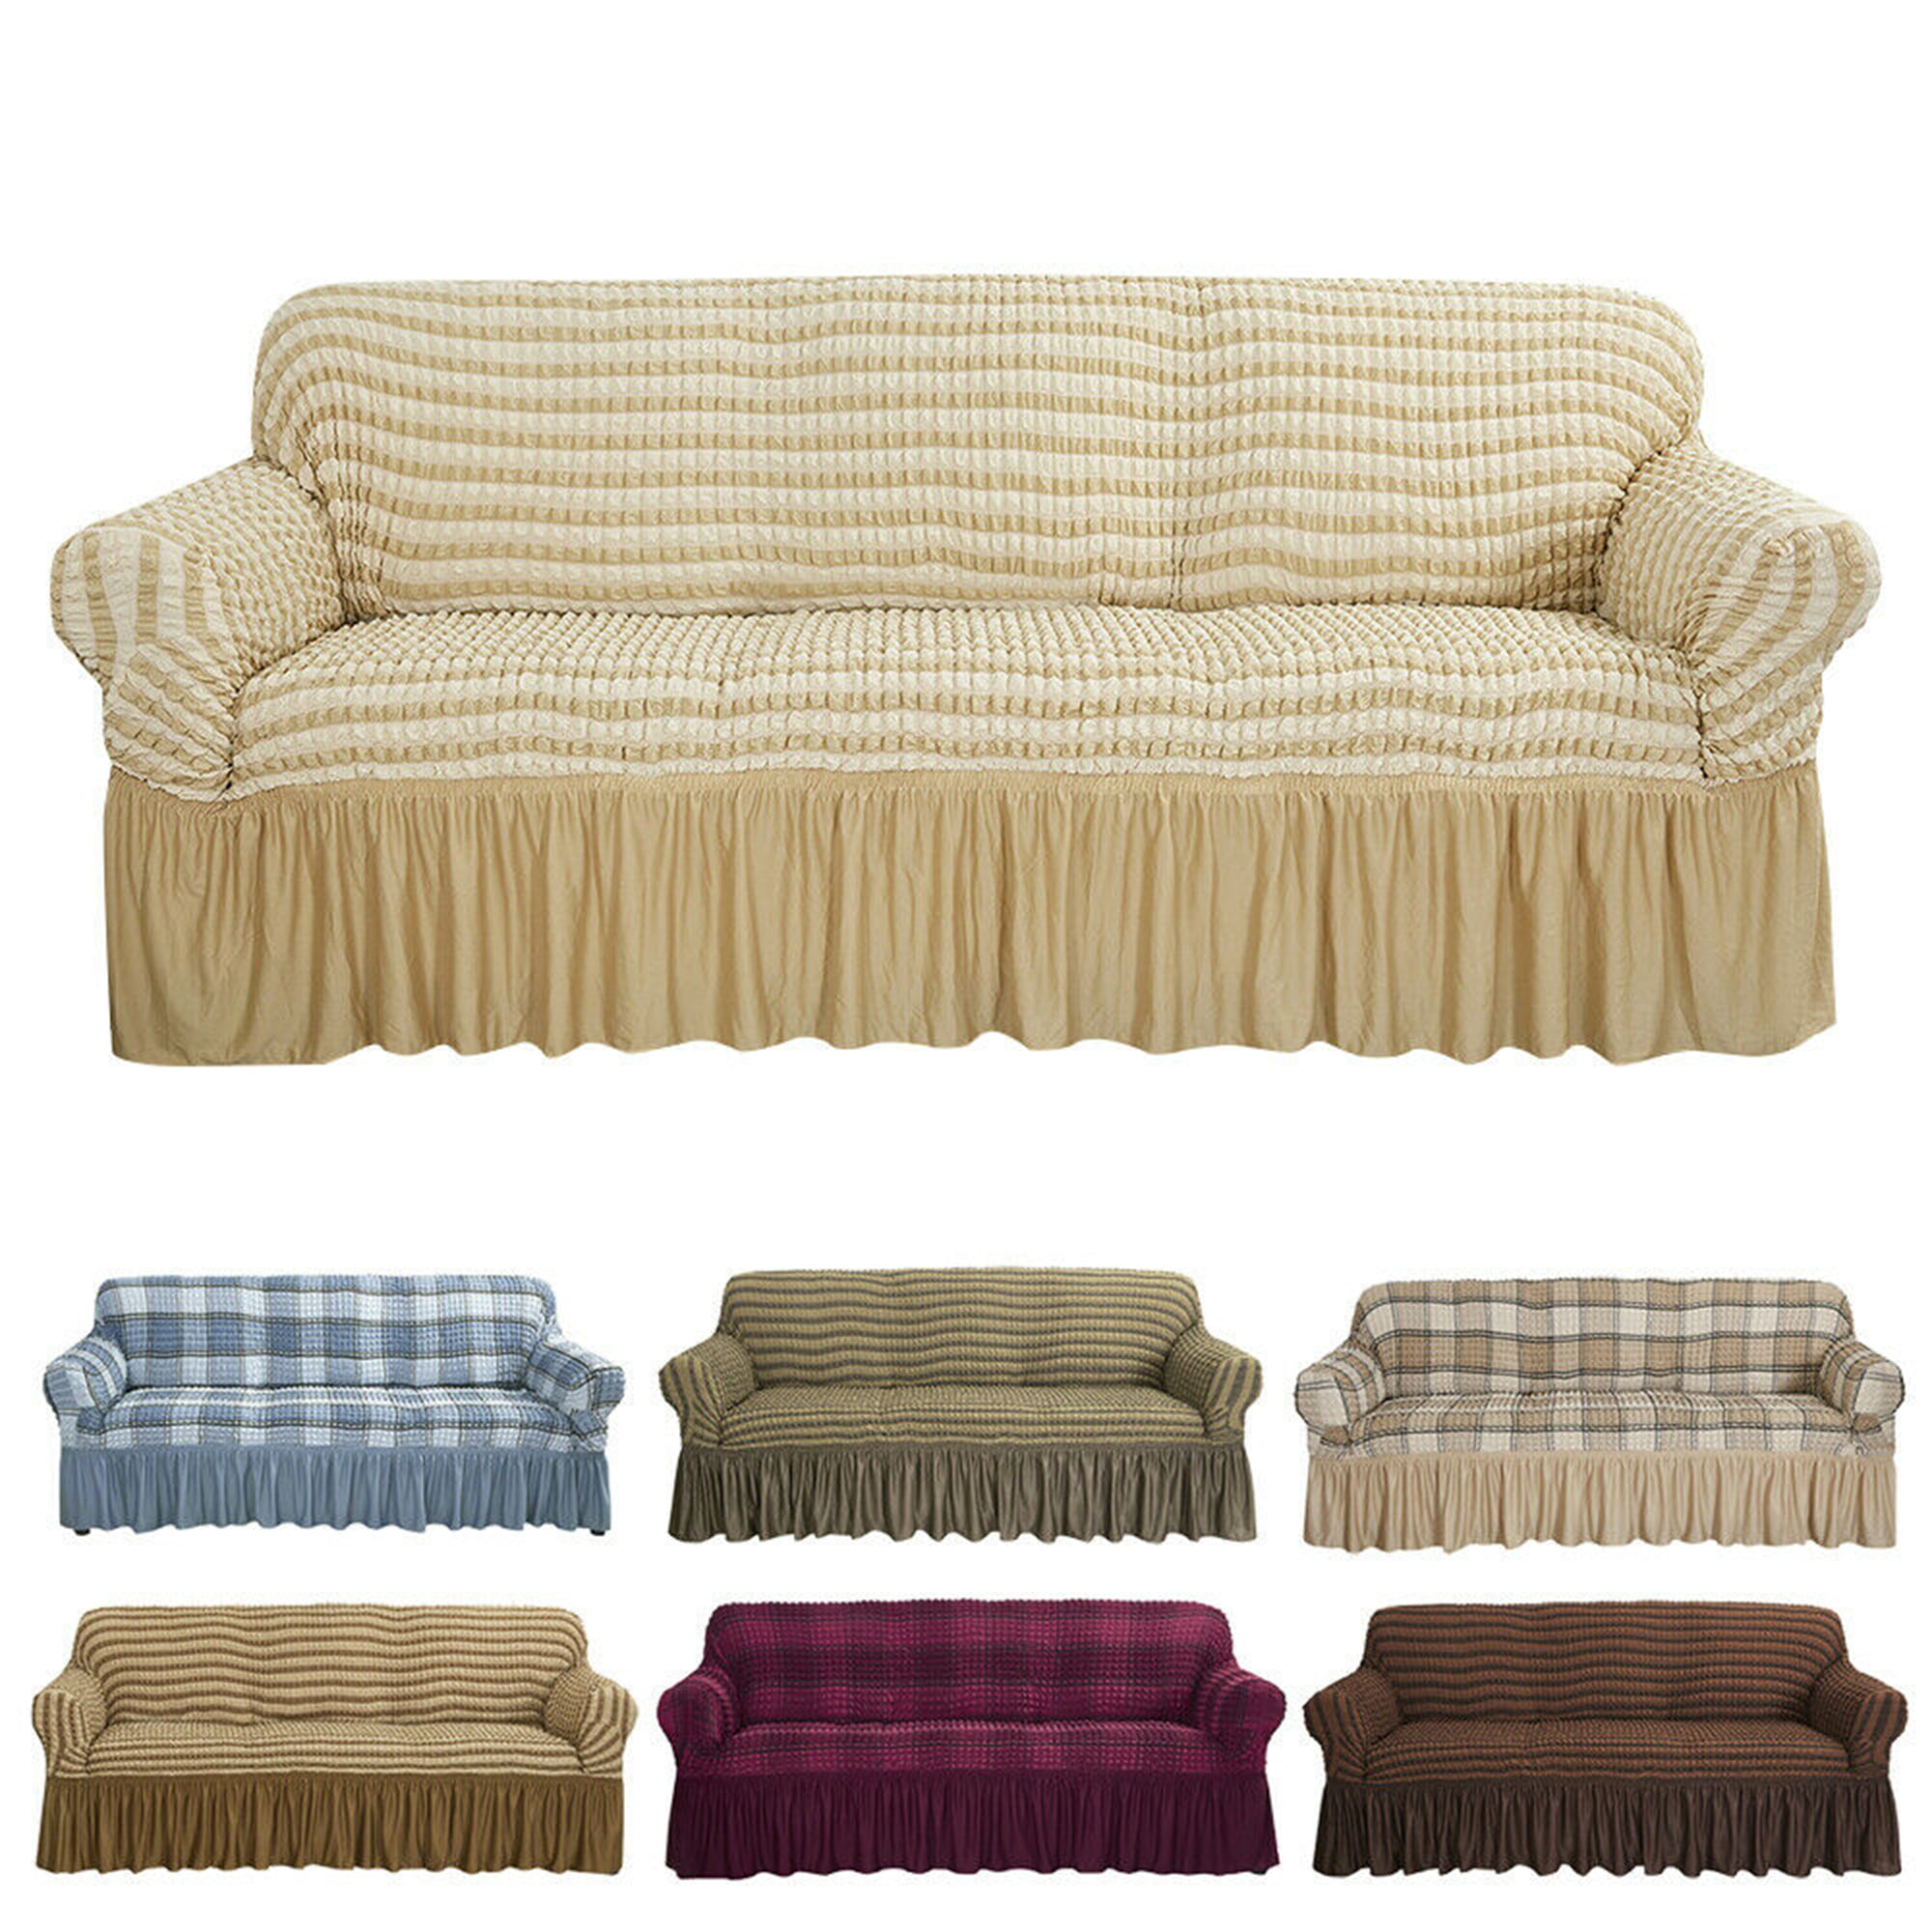 Details about   1/2/3/4 Seater Bubble Lattice Elastic Sofa Covers Stretch Slipcover Couch Cover 